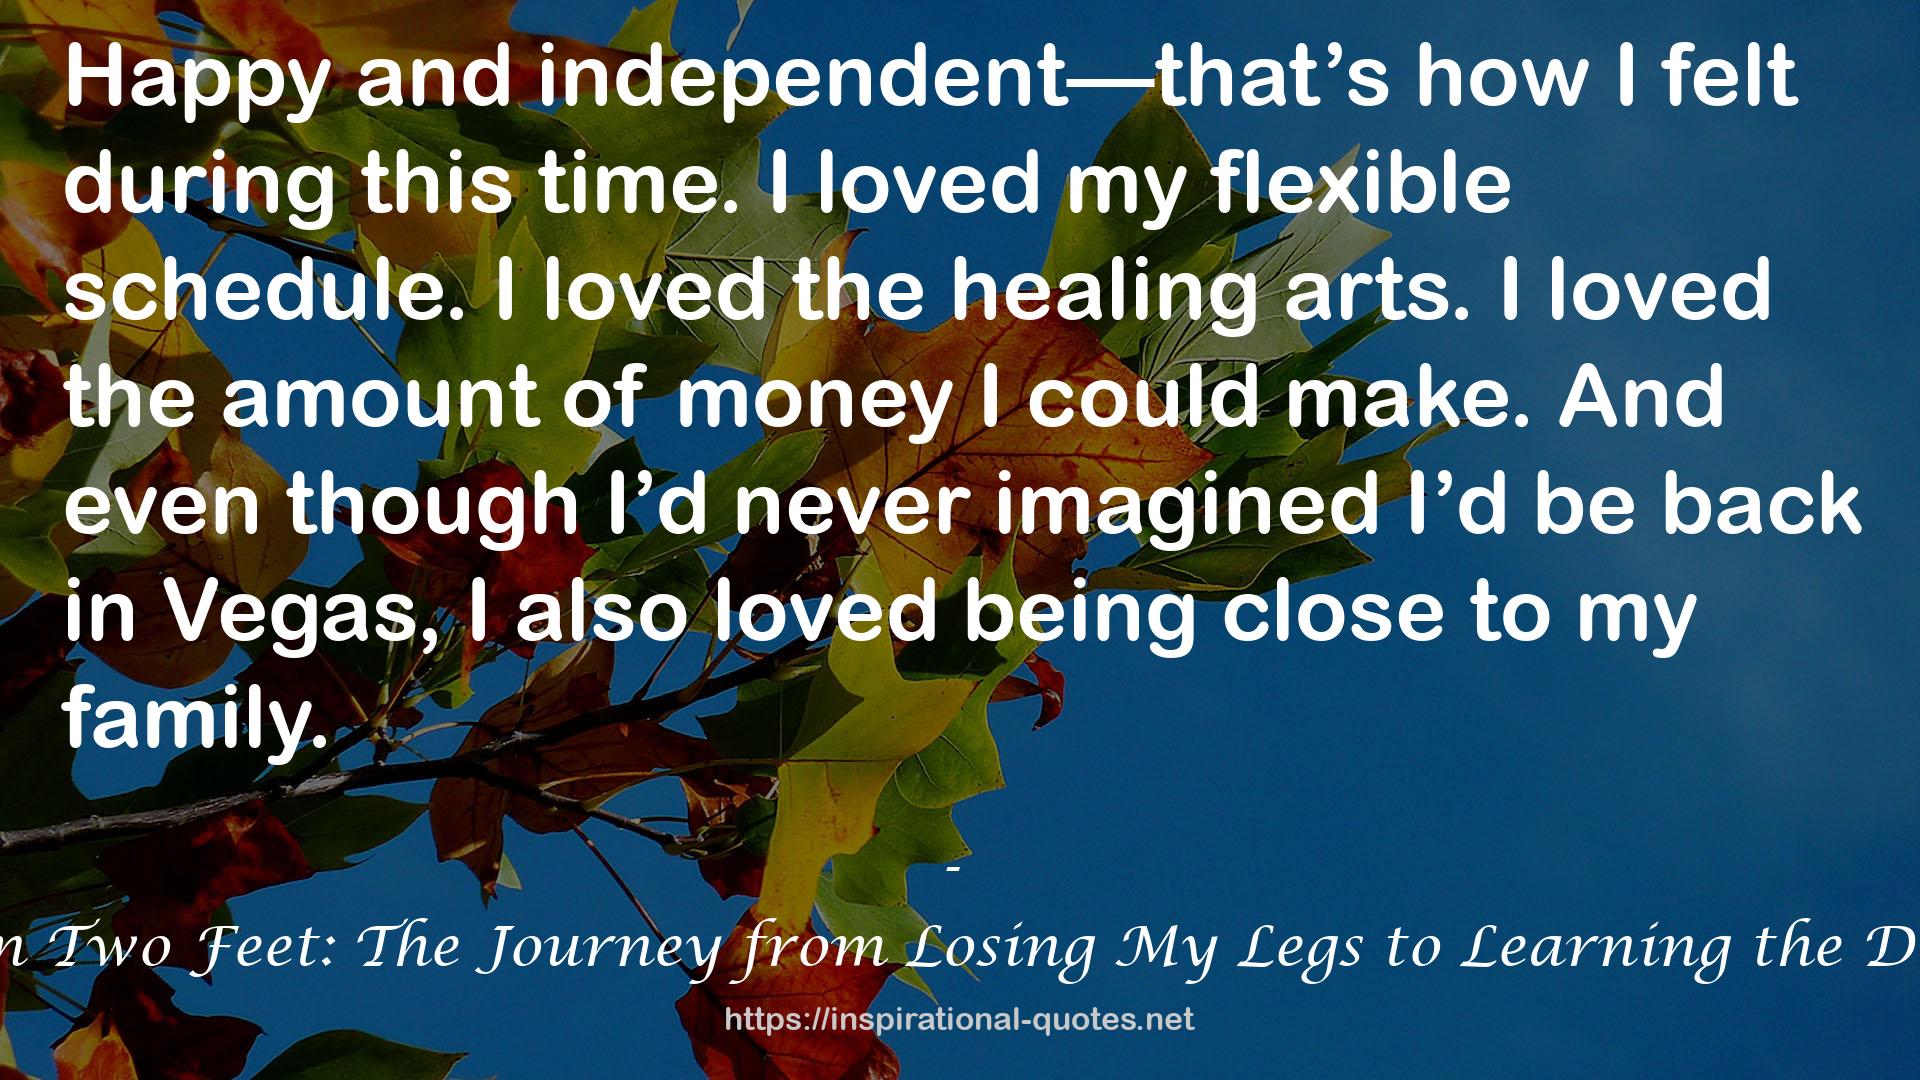 On My Own Two Feet: The Journey from Losing My Legs to Learning the Dance of Life QUOTES